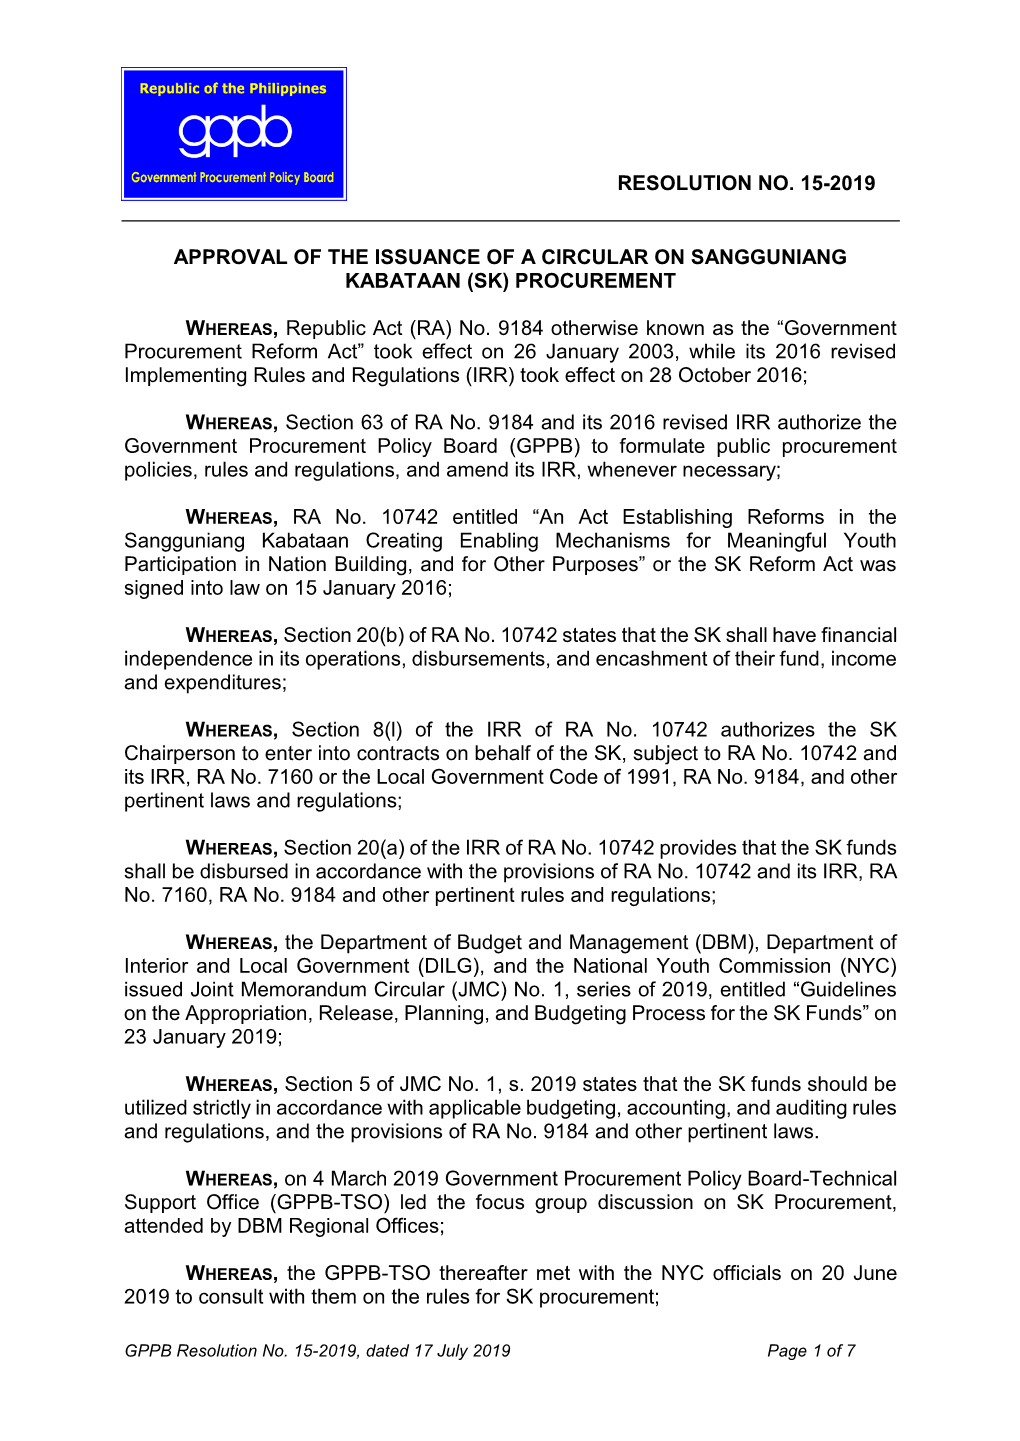 GPPB Resolution No. 15-2019, Dated 17 July 2019 Page 1 of 7